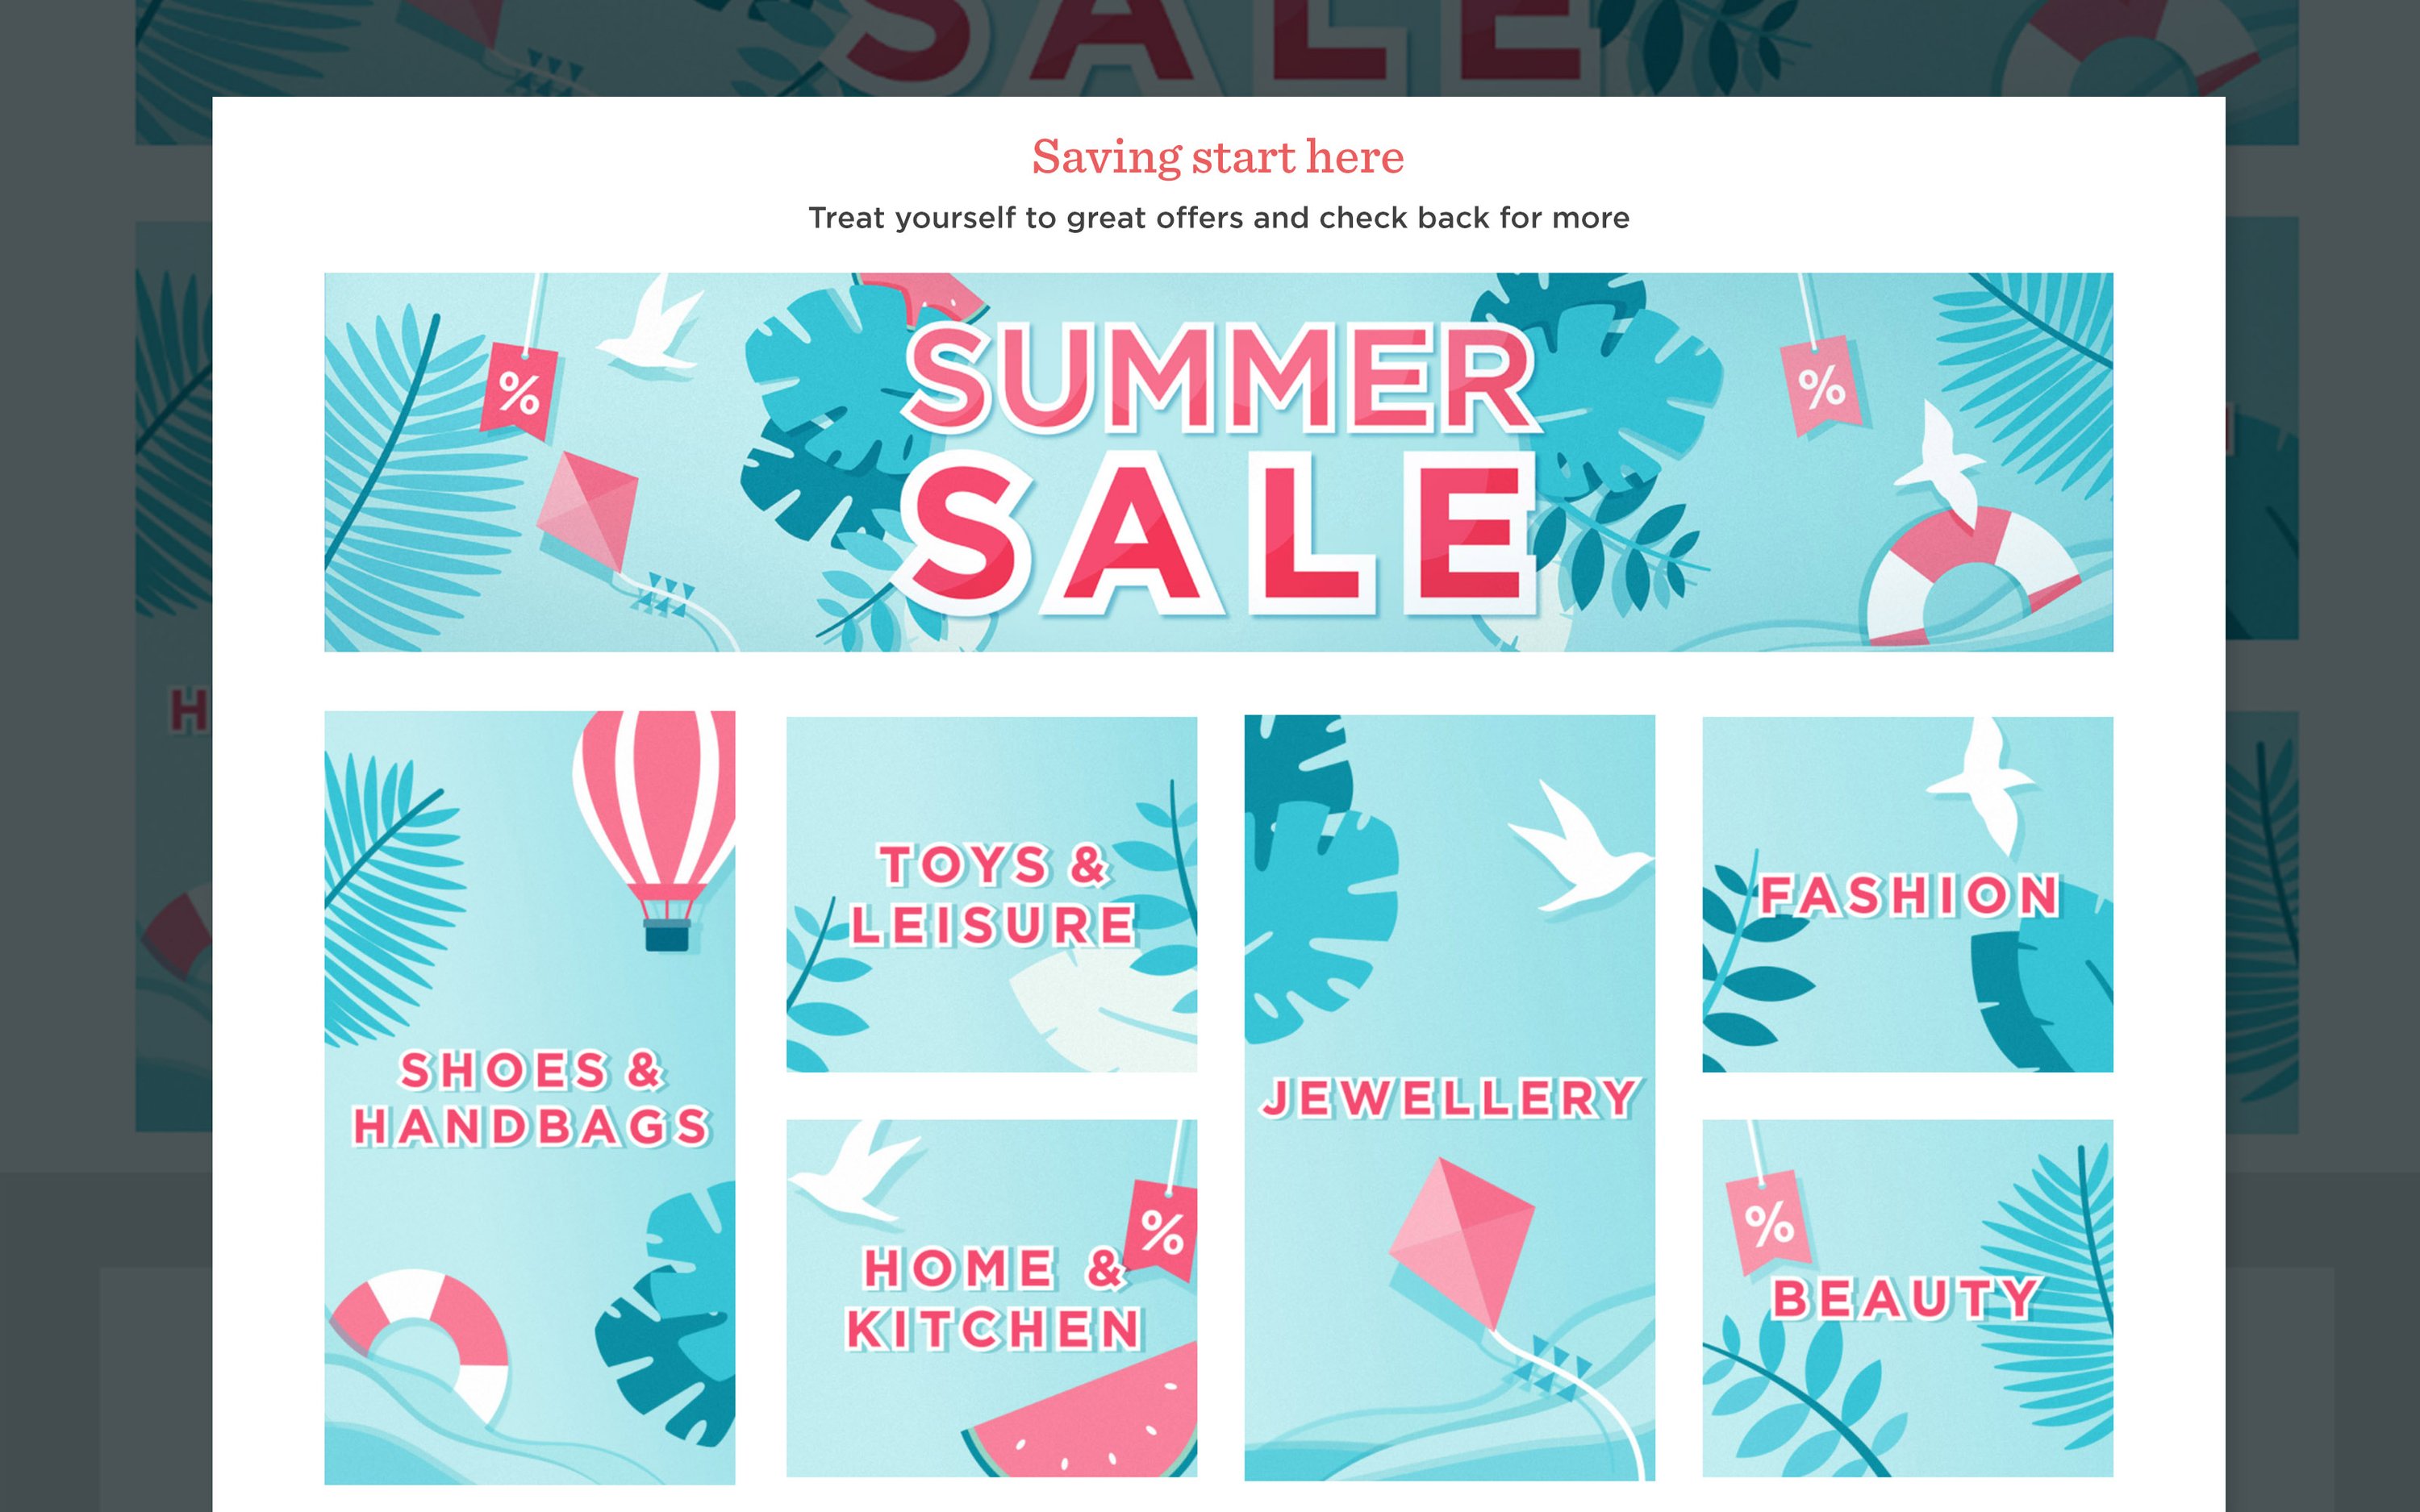 Summer Sale 2019 Clearance page desktop view